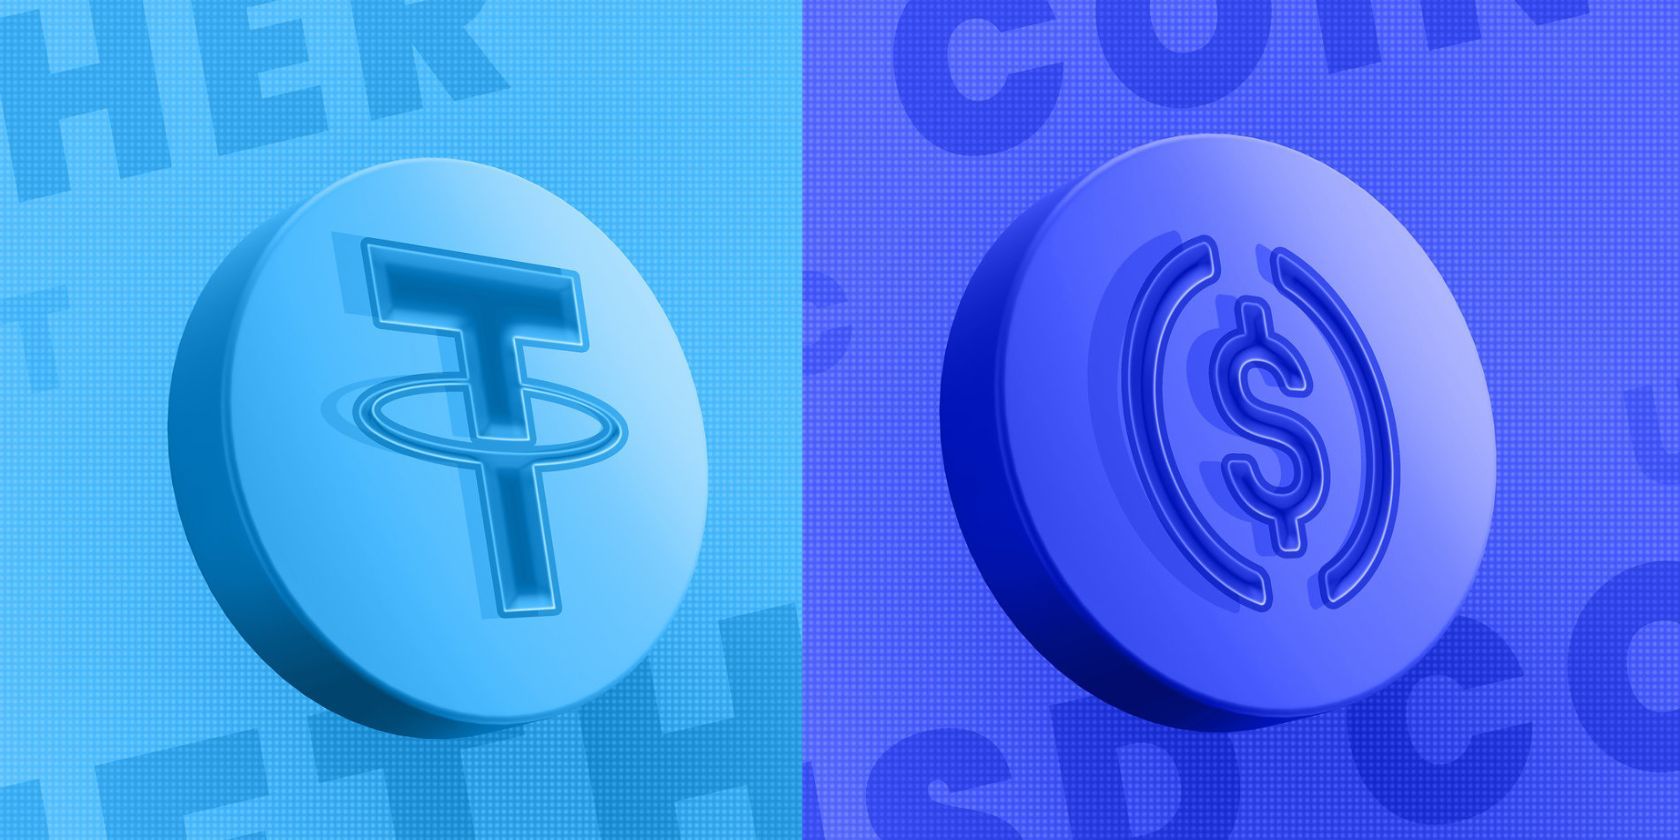 USDT vs USDC: Which Stablecoin Is Safer? | The Enterprise World